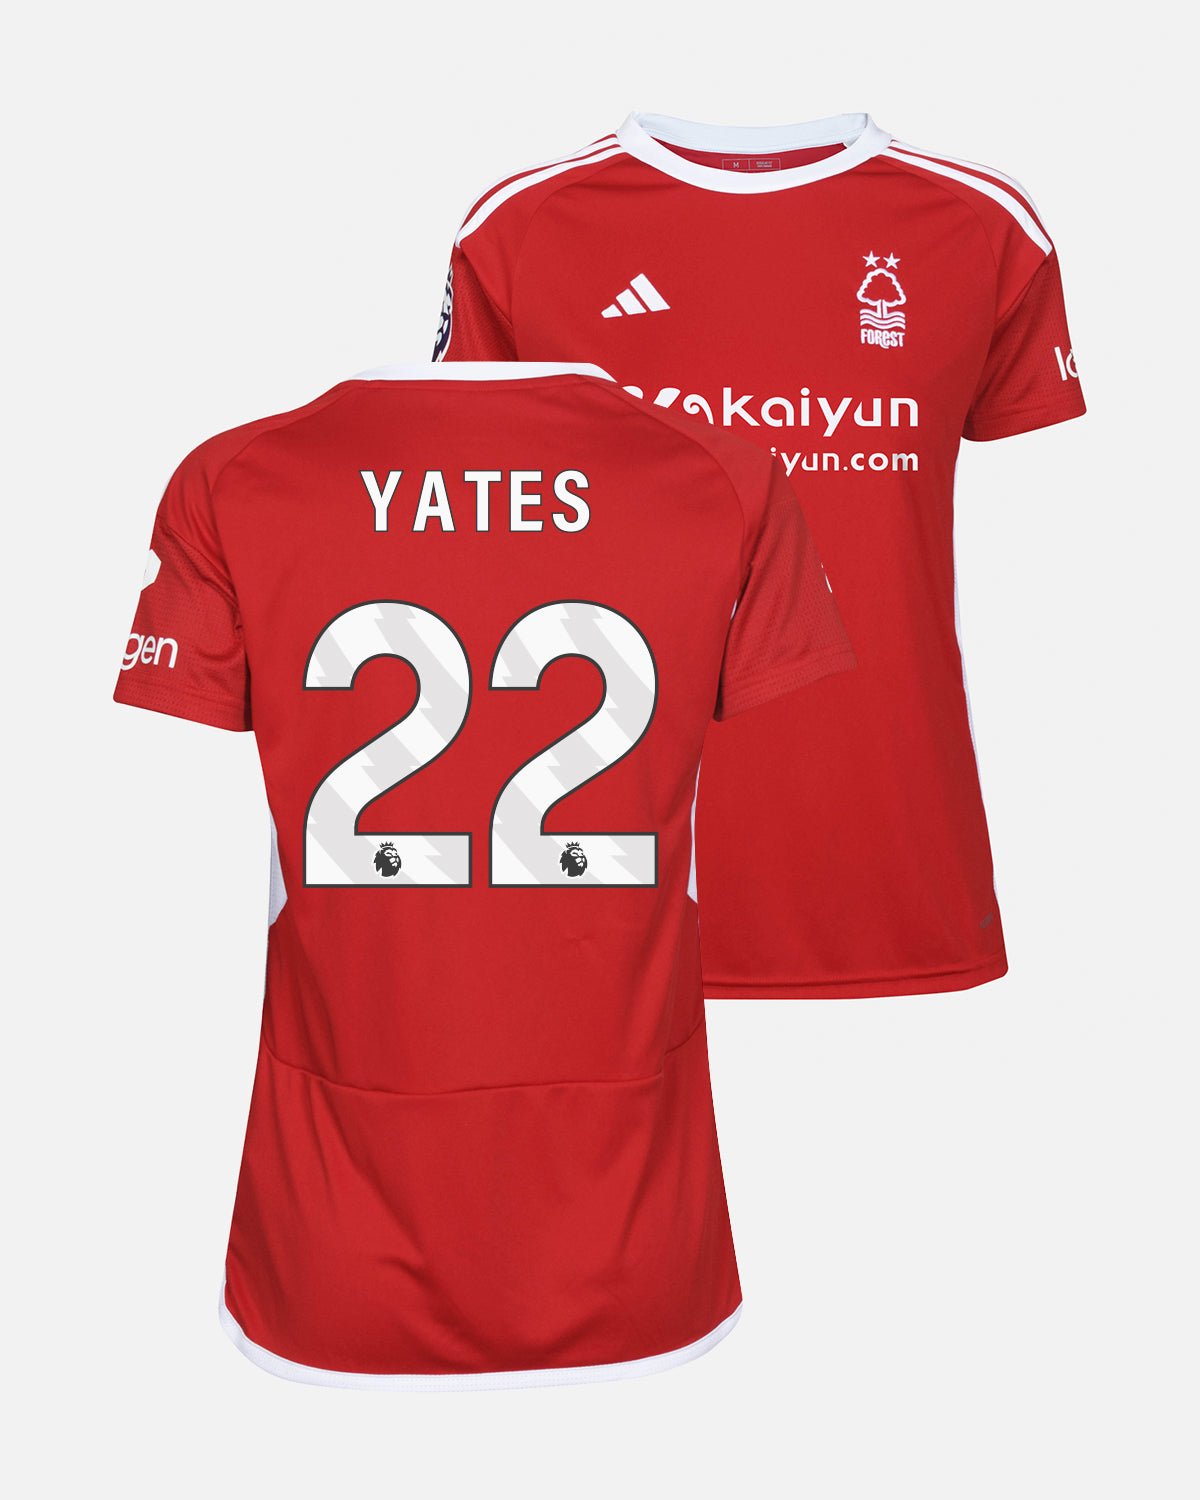 NFFC Women's Home Shirt 23-24 - Yates 22 - Nottingham Forest FC